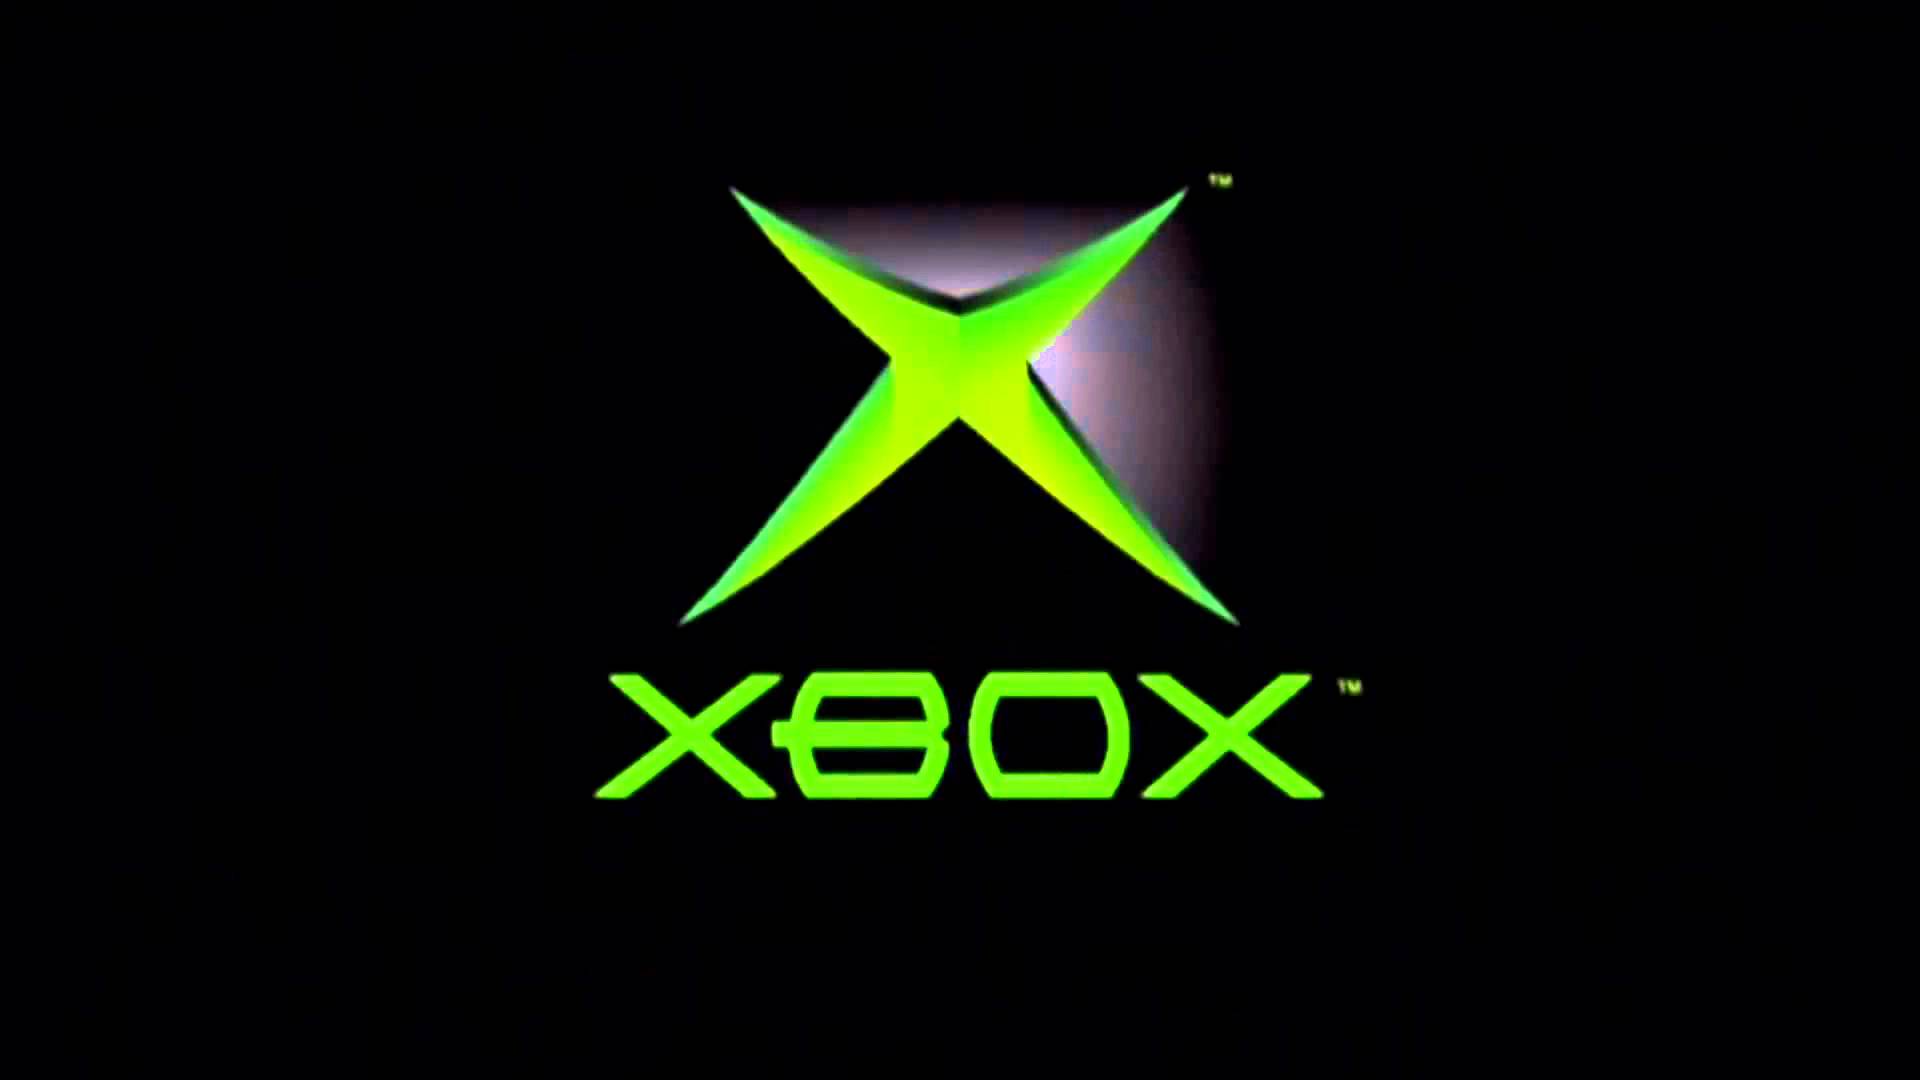 Xbox Backwards Compatibility on Track for 2017